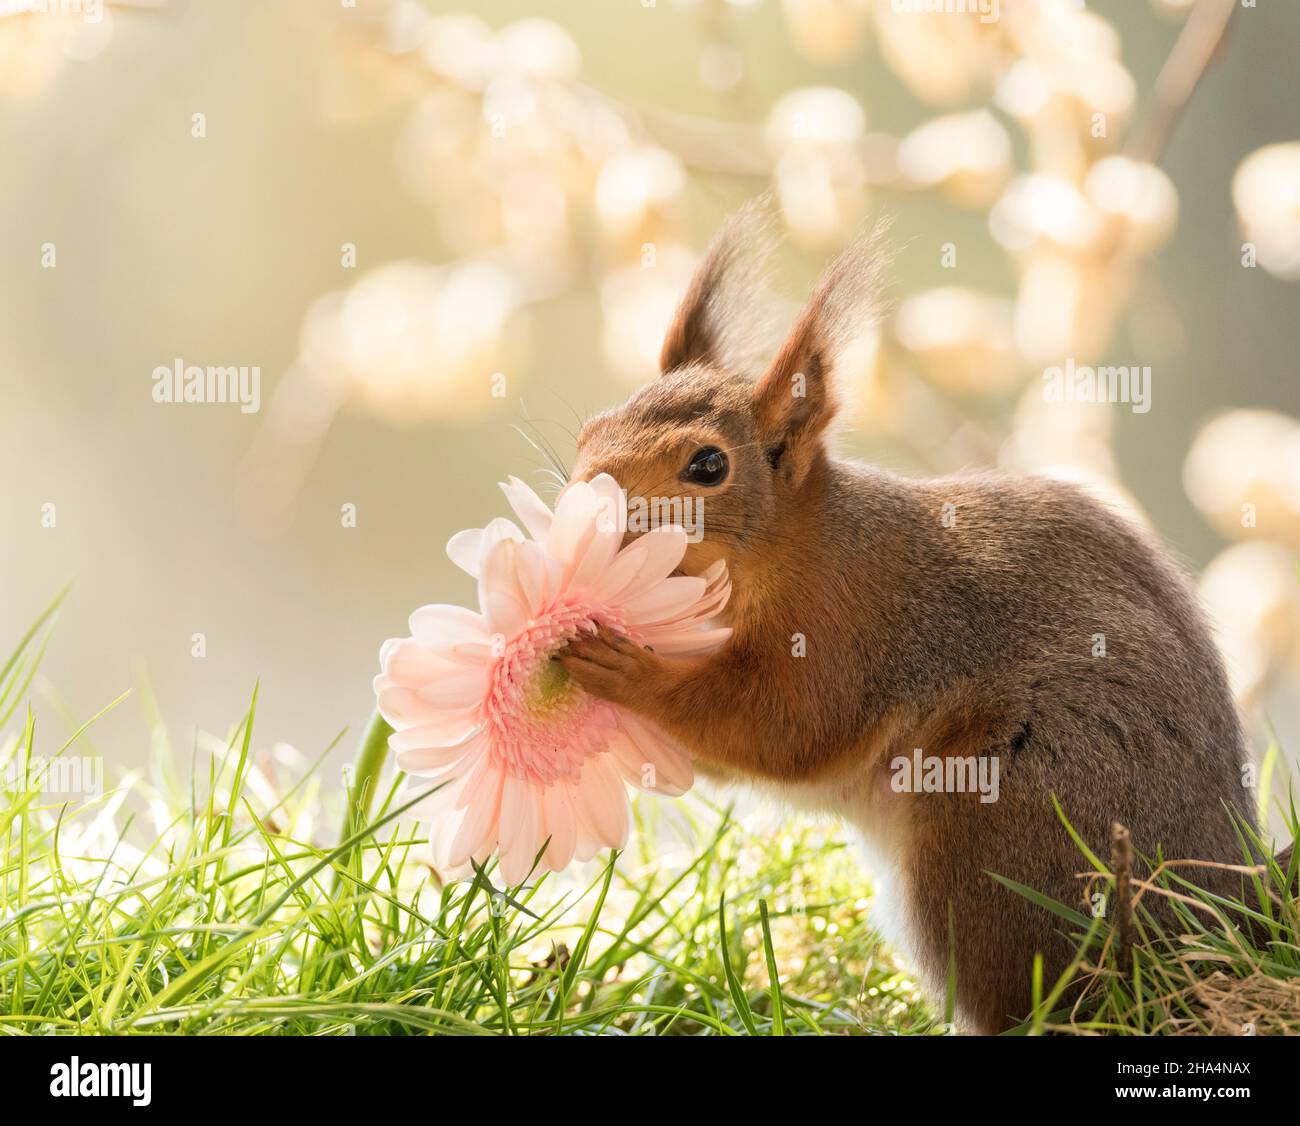 red squirrel is holding a pink daisy Stock Photo